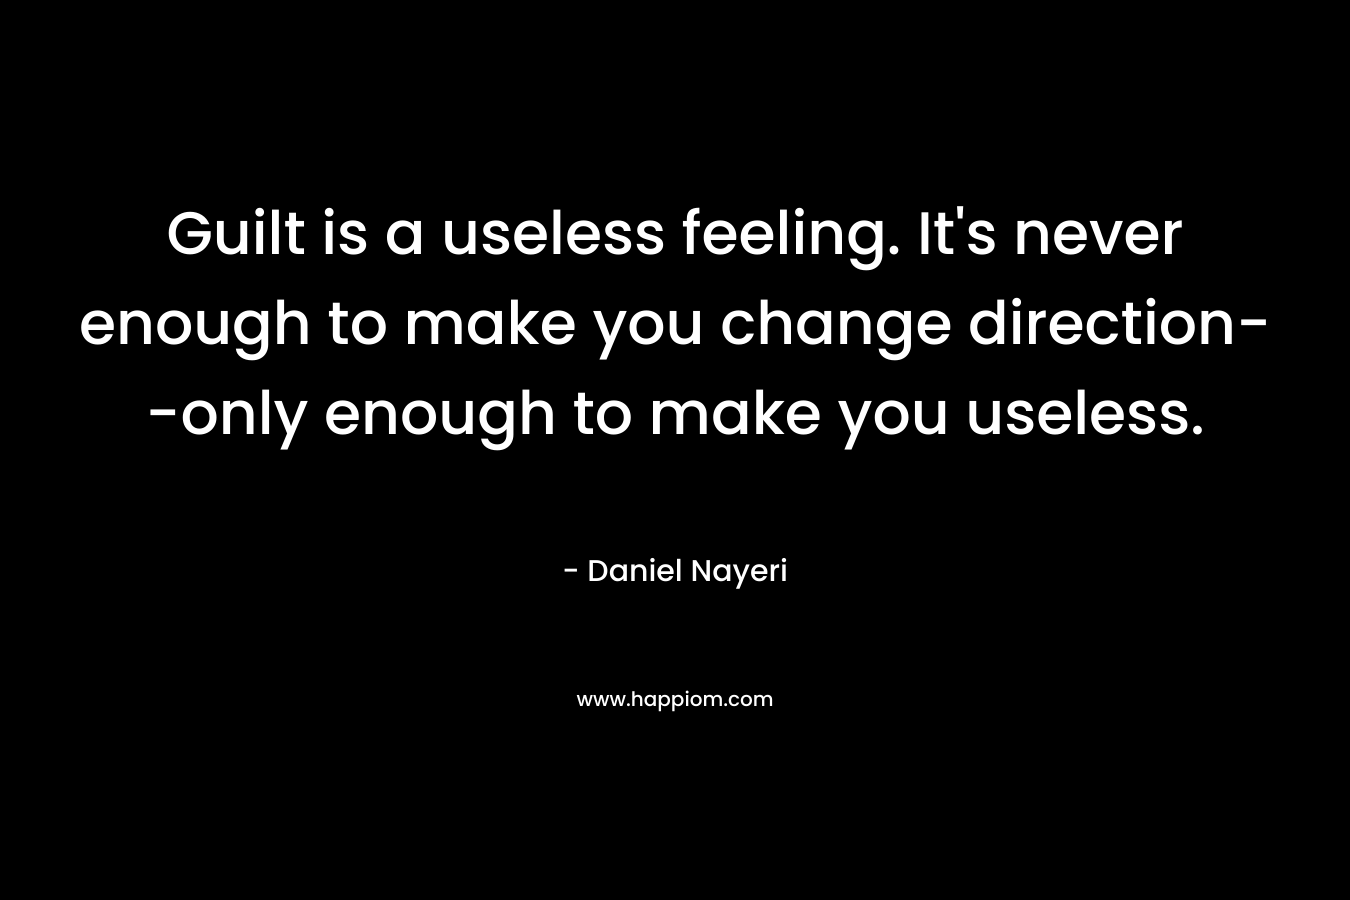 Guilt is a useless feeling. It’s never enough to make you change direction–only enough to make you useless. – Daniel Nayeri